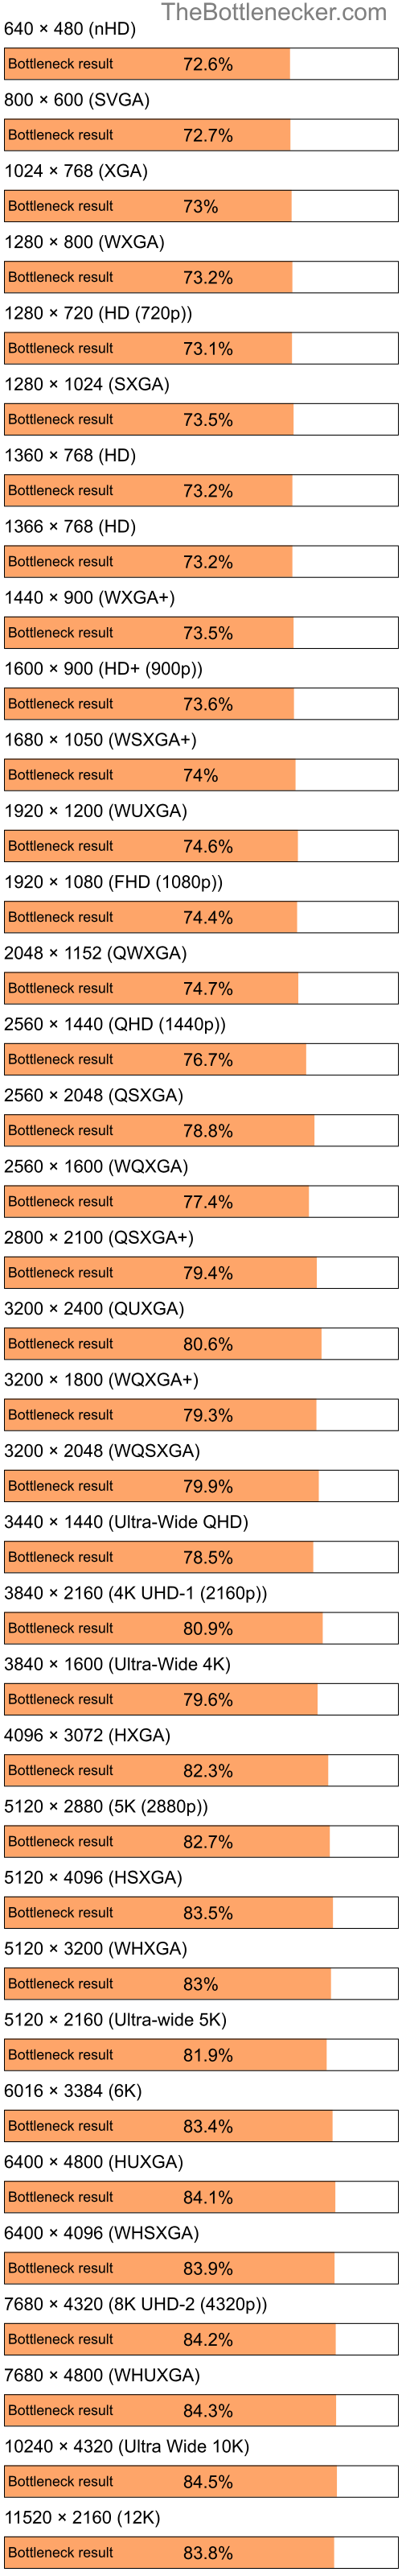 Bottleneck results by resolution for Intel Atom Z520 and NVIDIA nForce 720a in Graphic Card Intense Tasks